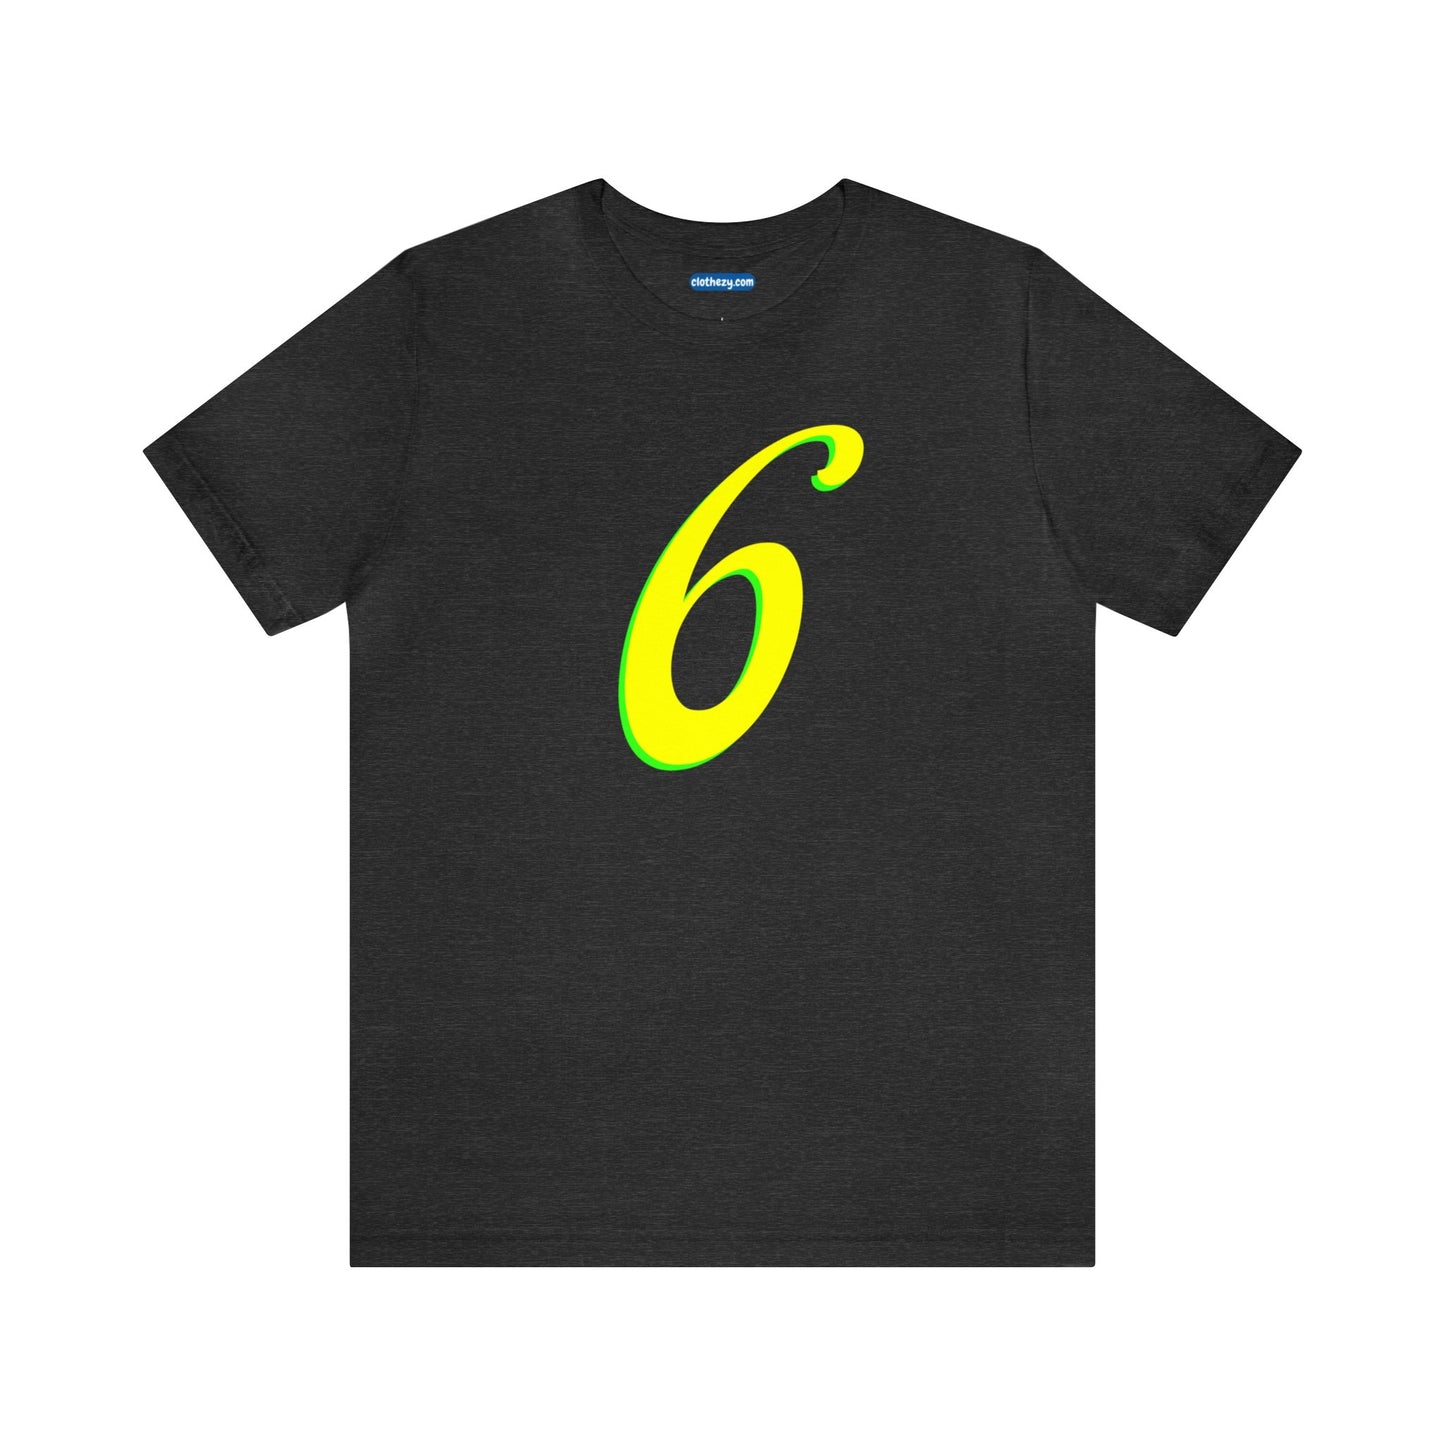 Number 6 Design - Soft Cotton Tee for birthdays and celebrations, Gift for friends and family, Multiple Options by clothezy.com in Gold Size Small - Buy Now